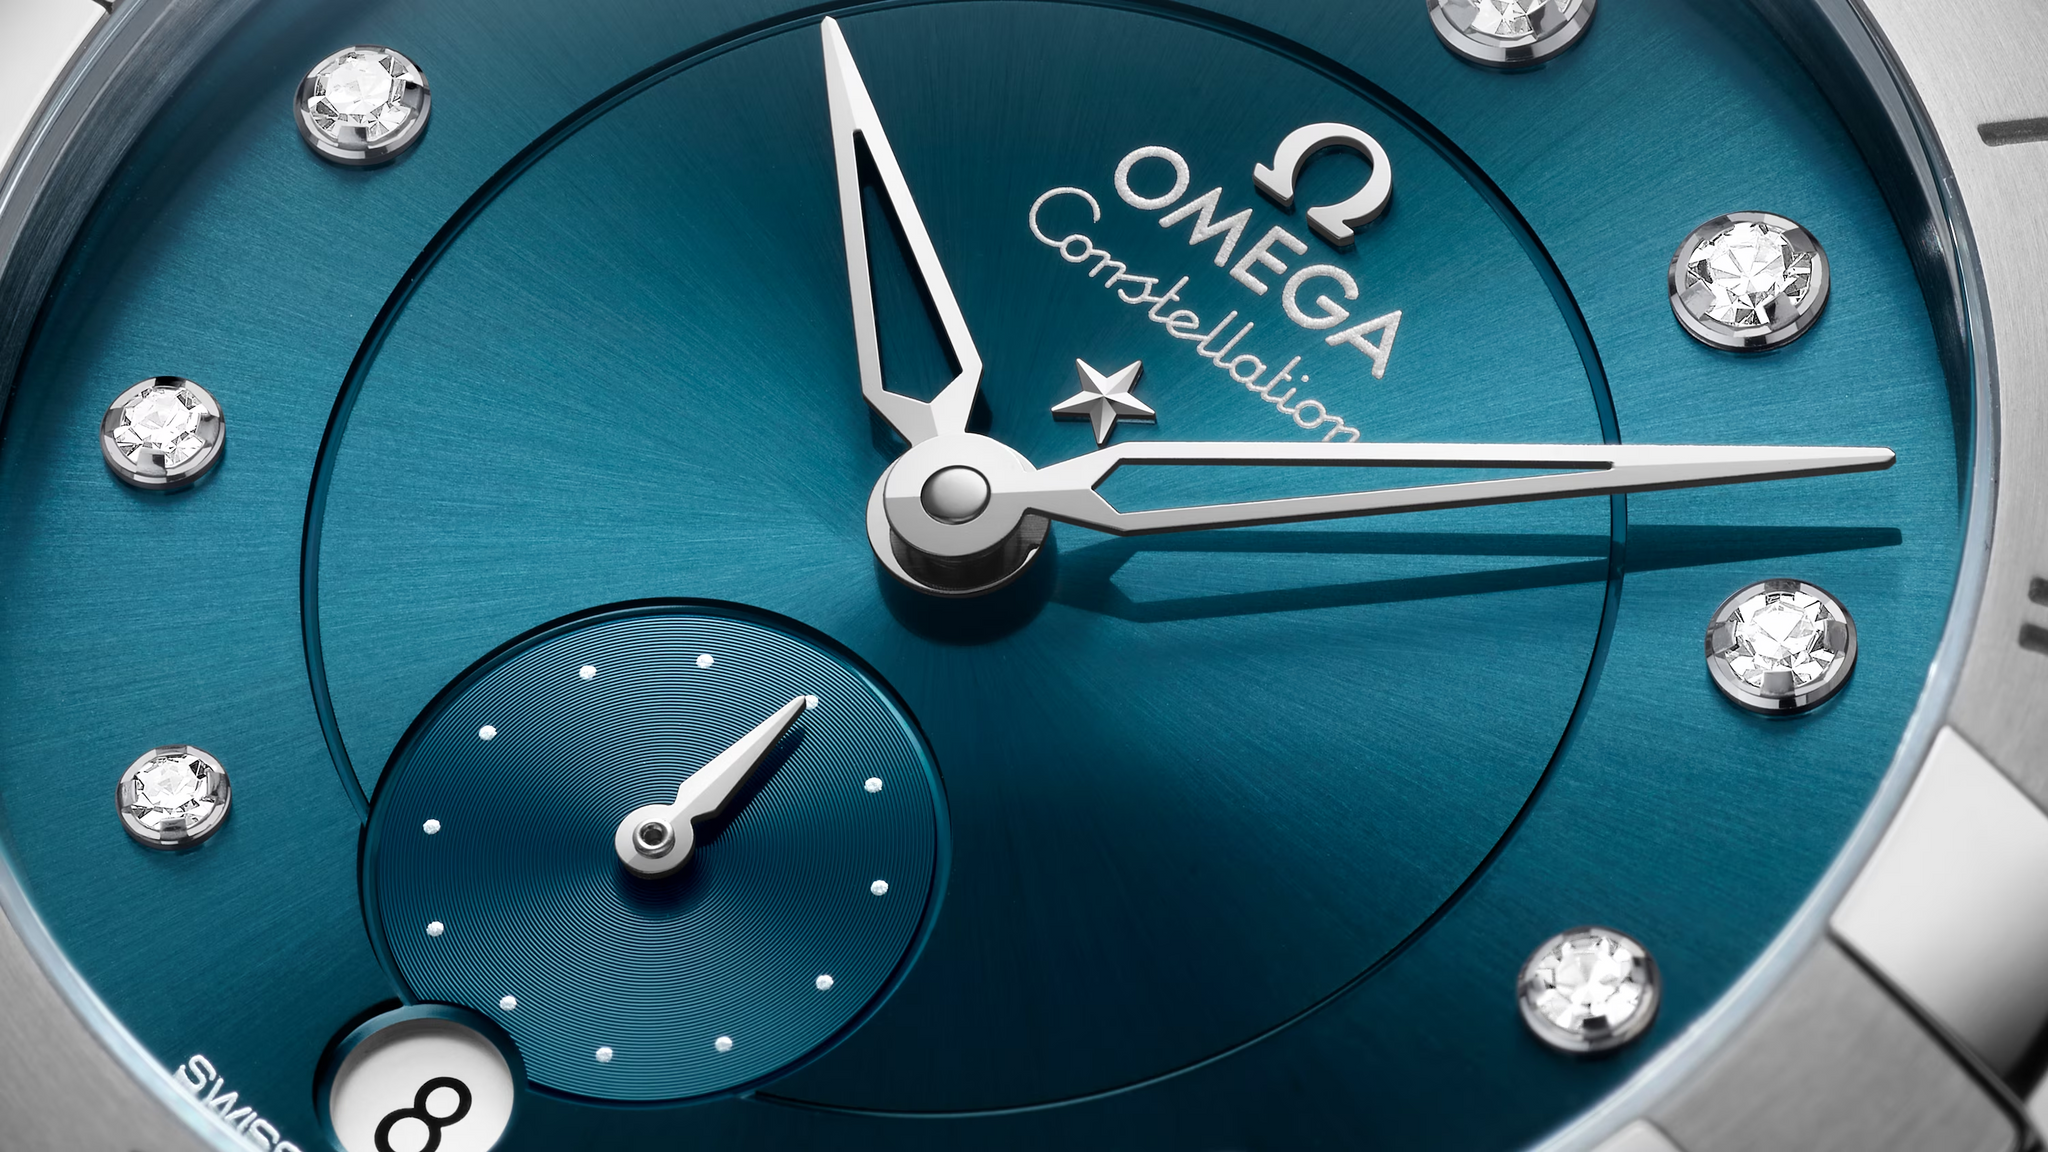 OMEGA-CONSTELLATION CO-AXIAL MASTER CHRONOMETER SMALL SECONDS 34 MM 131.10.34.20.53.001